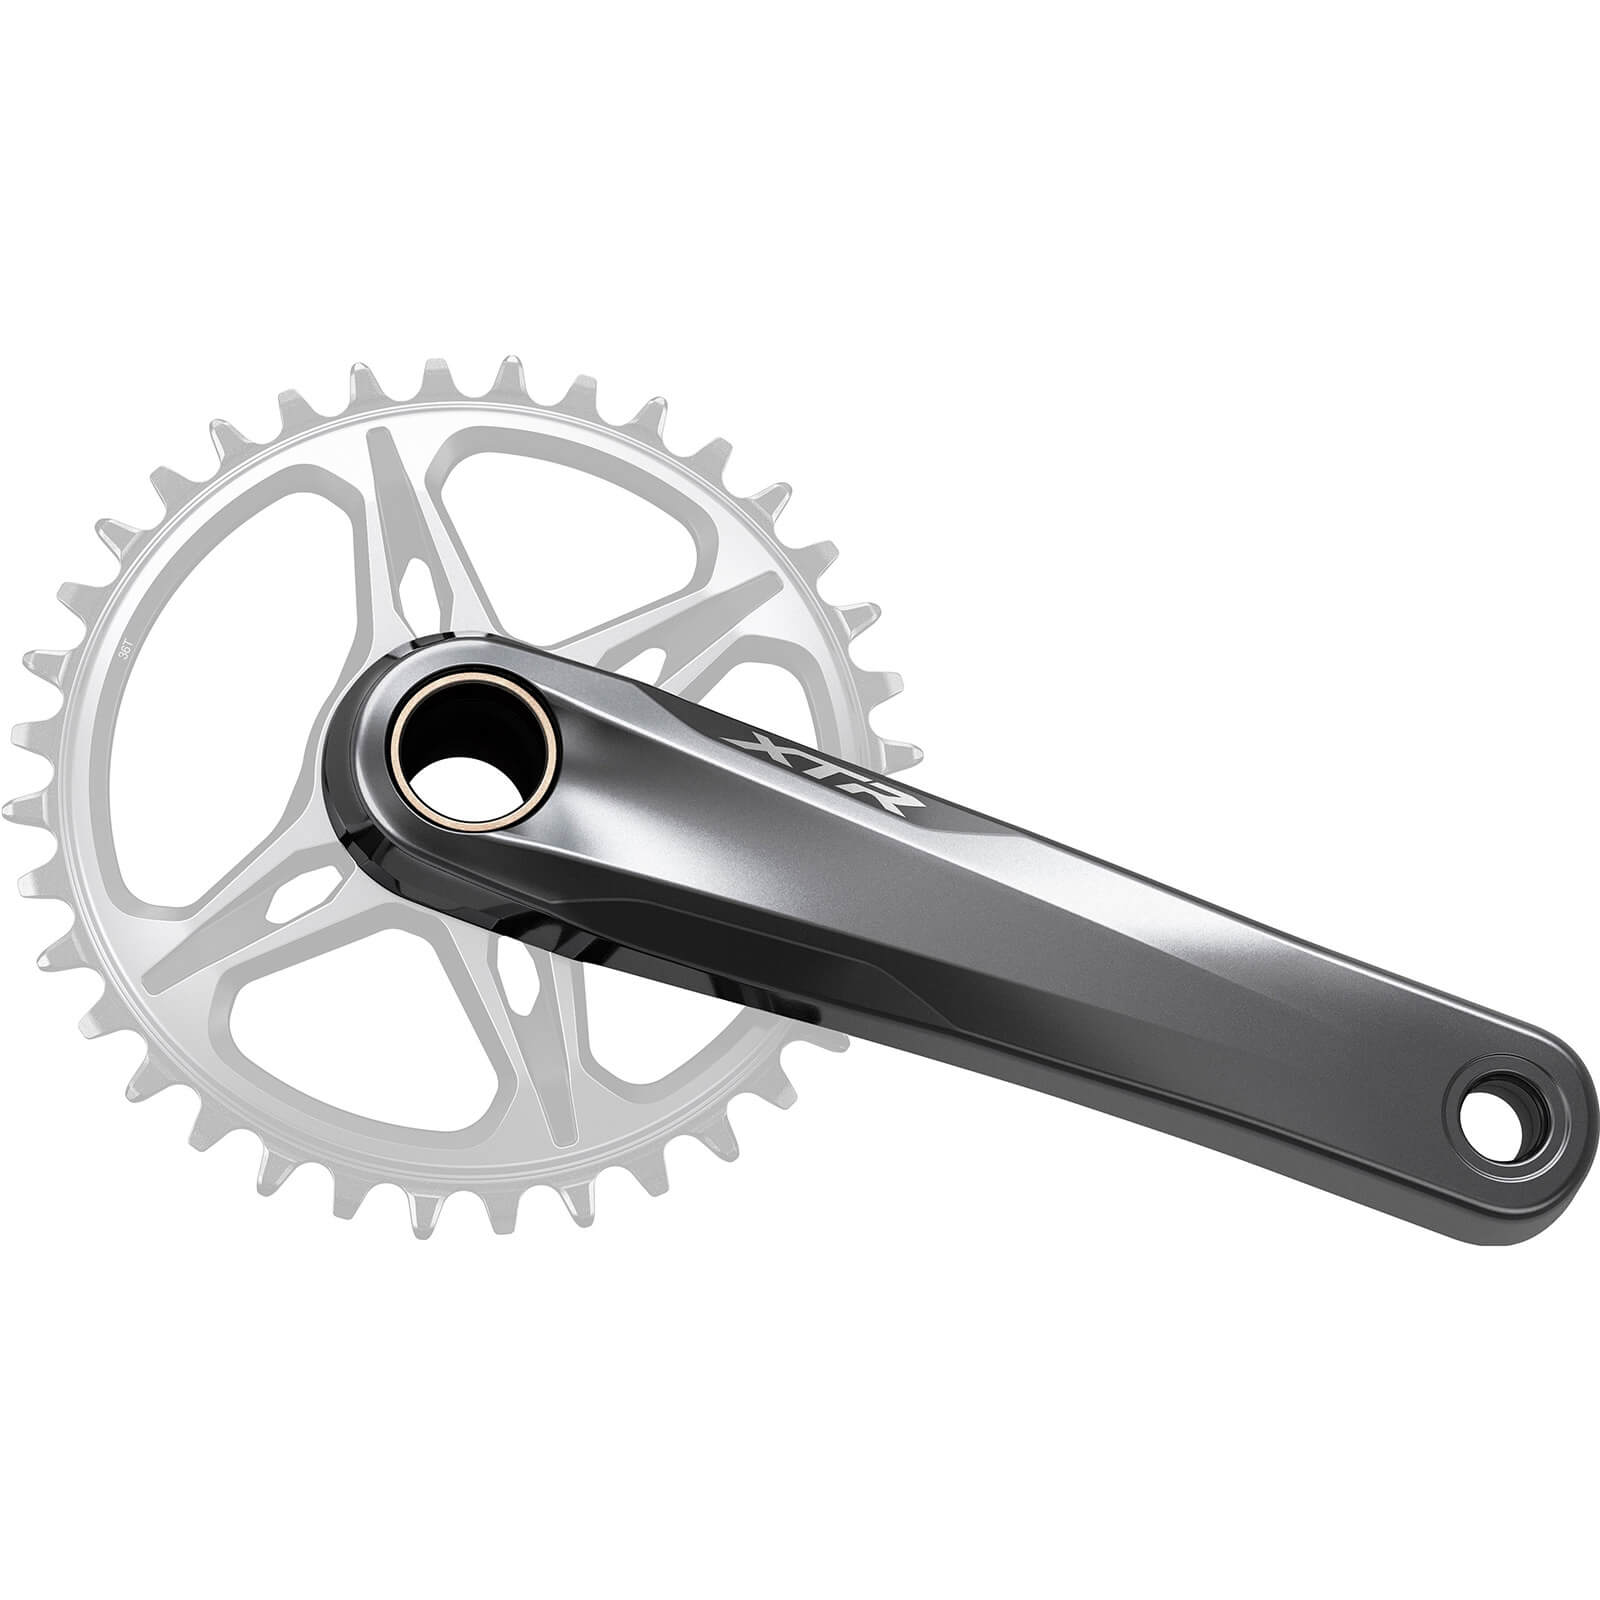 Shimano XTR M9120 Crankset without Chainring - 170mm